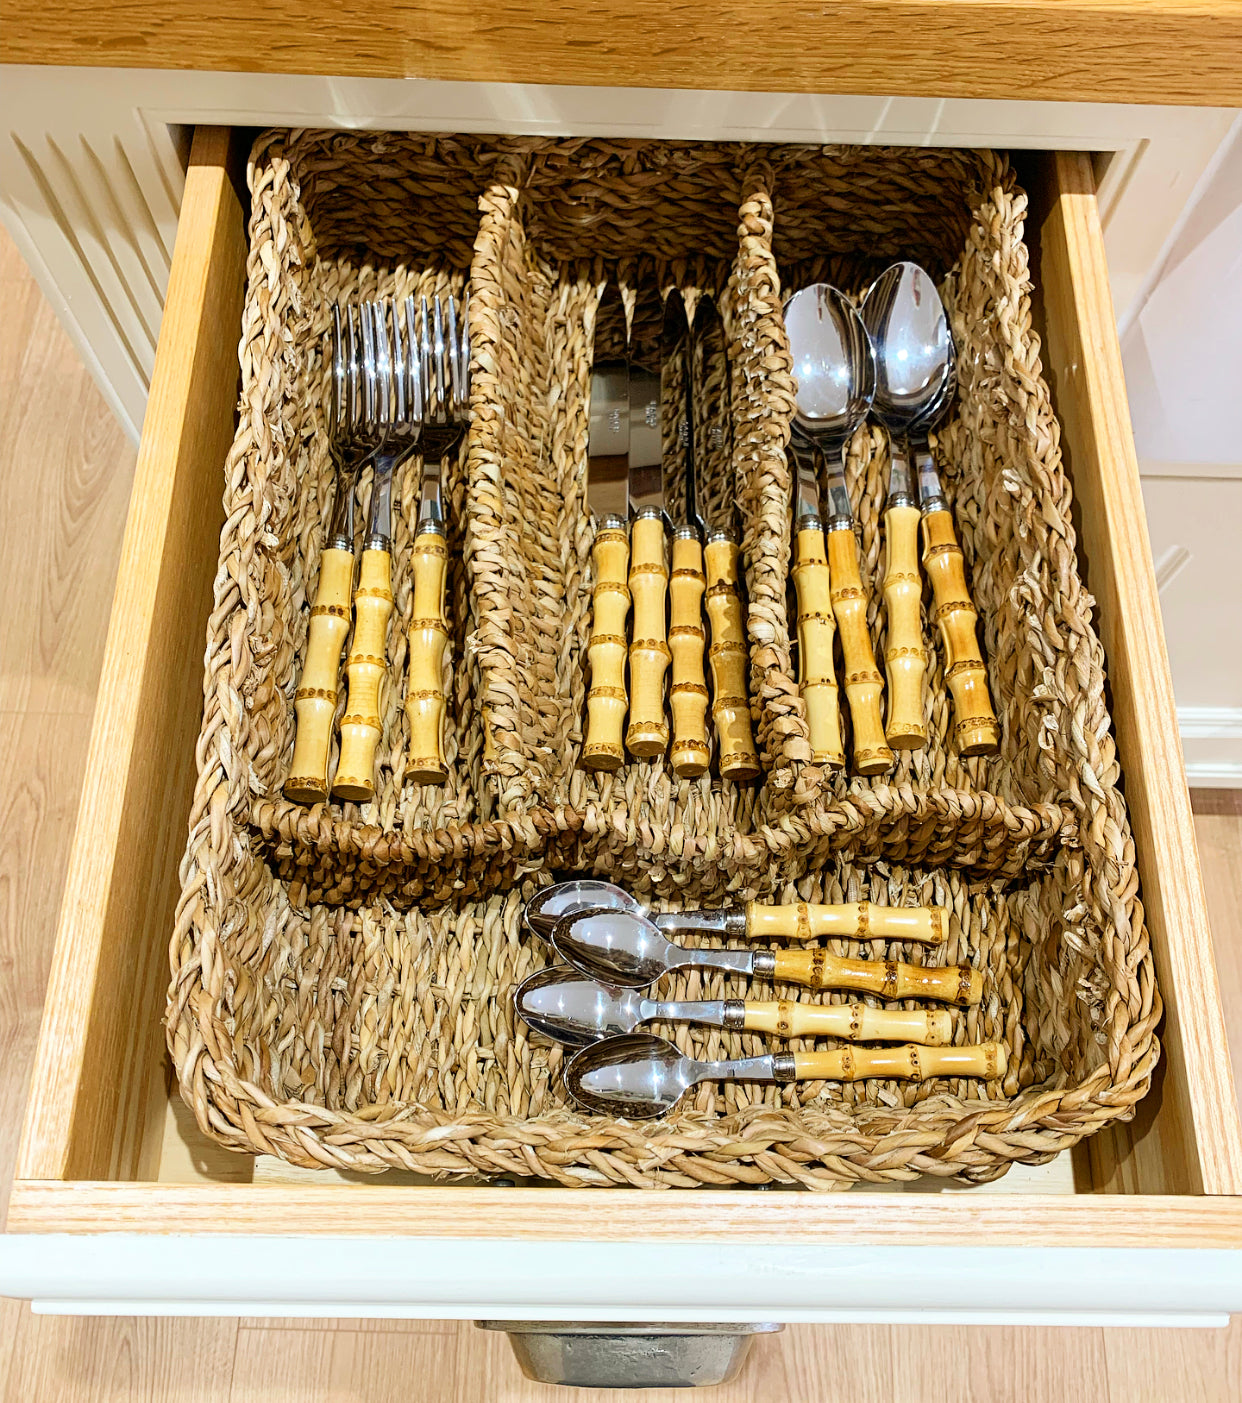 Woven Seagrass Cutlery Tray